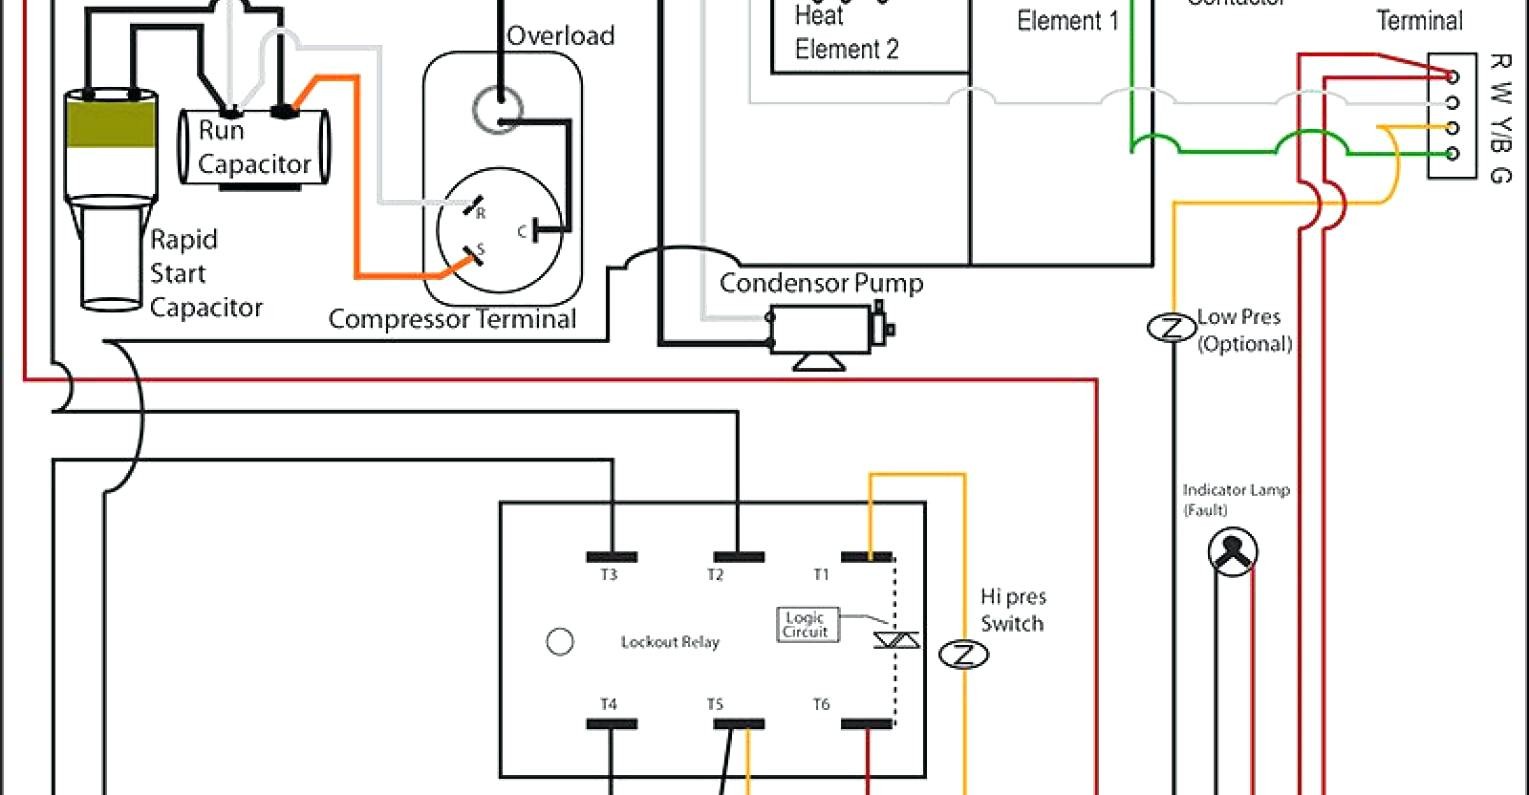 Full Size of Central Air Conditioner Wiring Schematic Heating Gorgeous And Thermostat Diagram Full Size